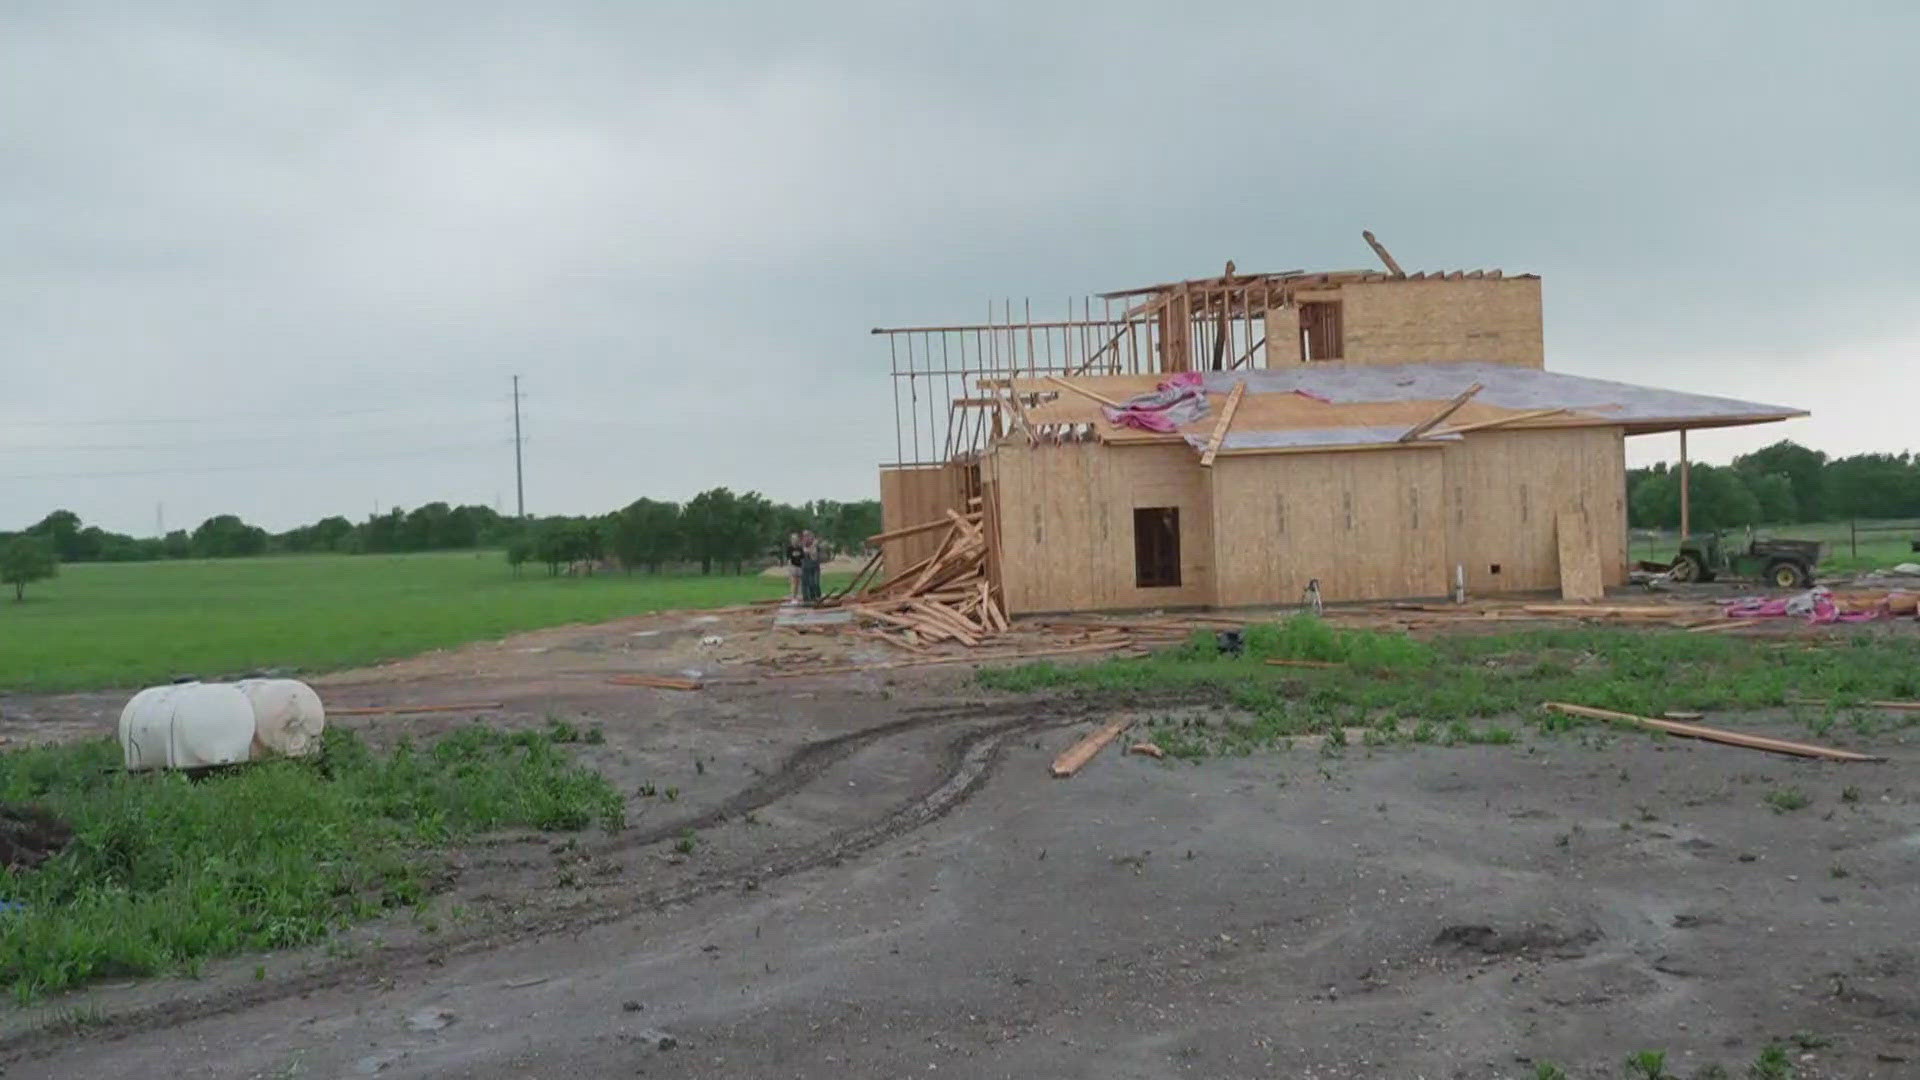 Damage was reported from storms Friday, April 26, in Hill County, Texas.